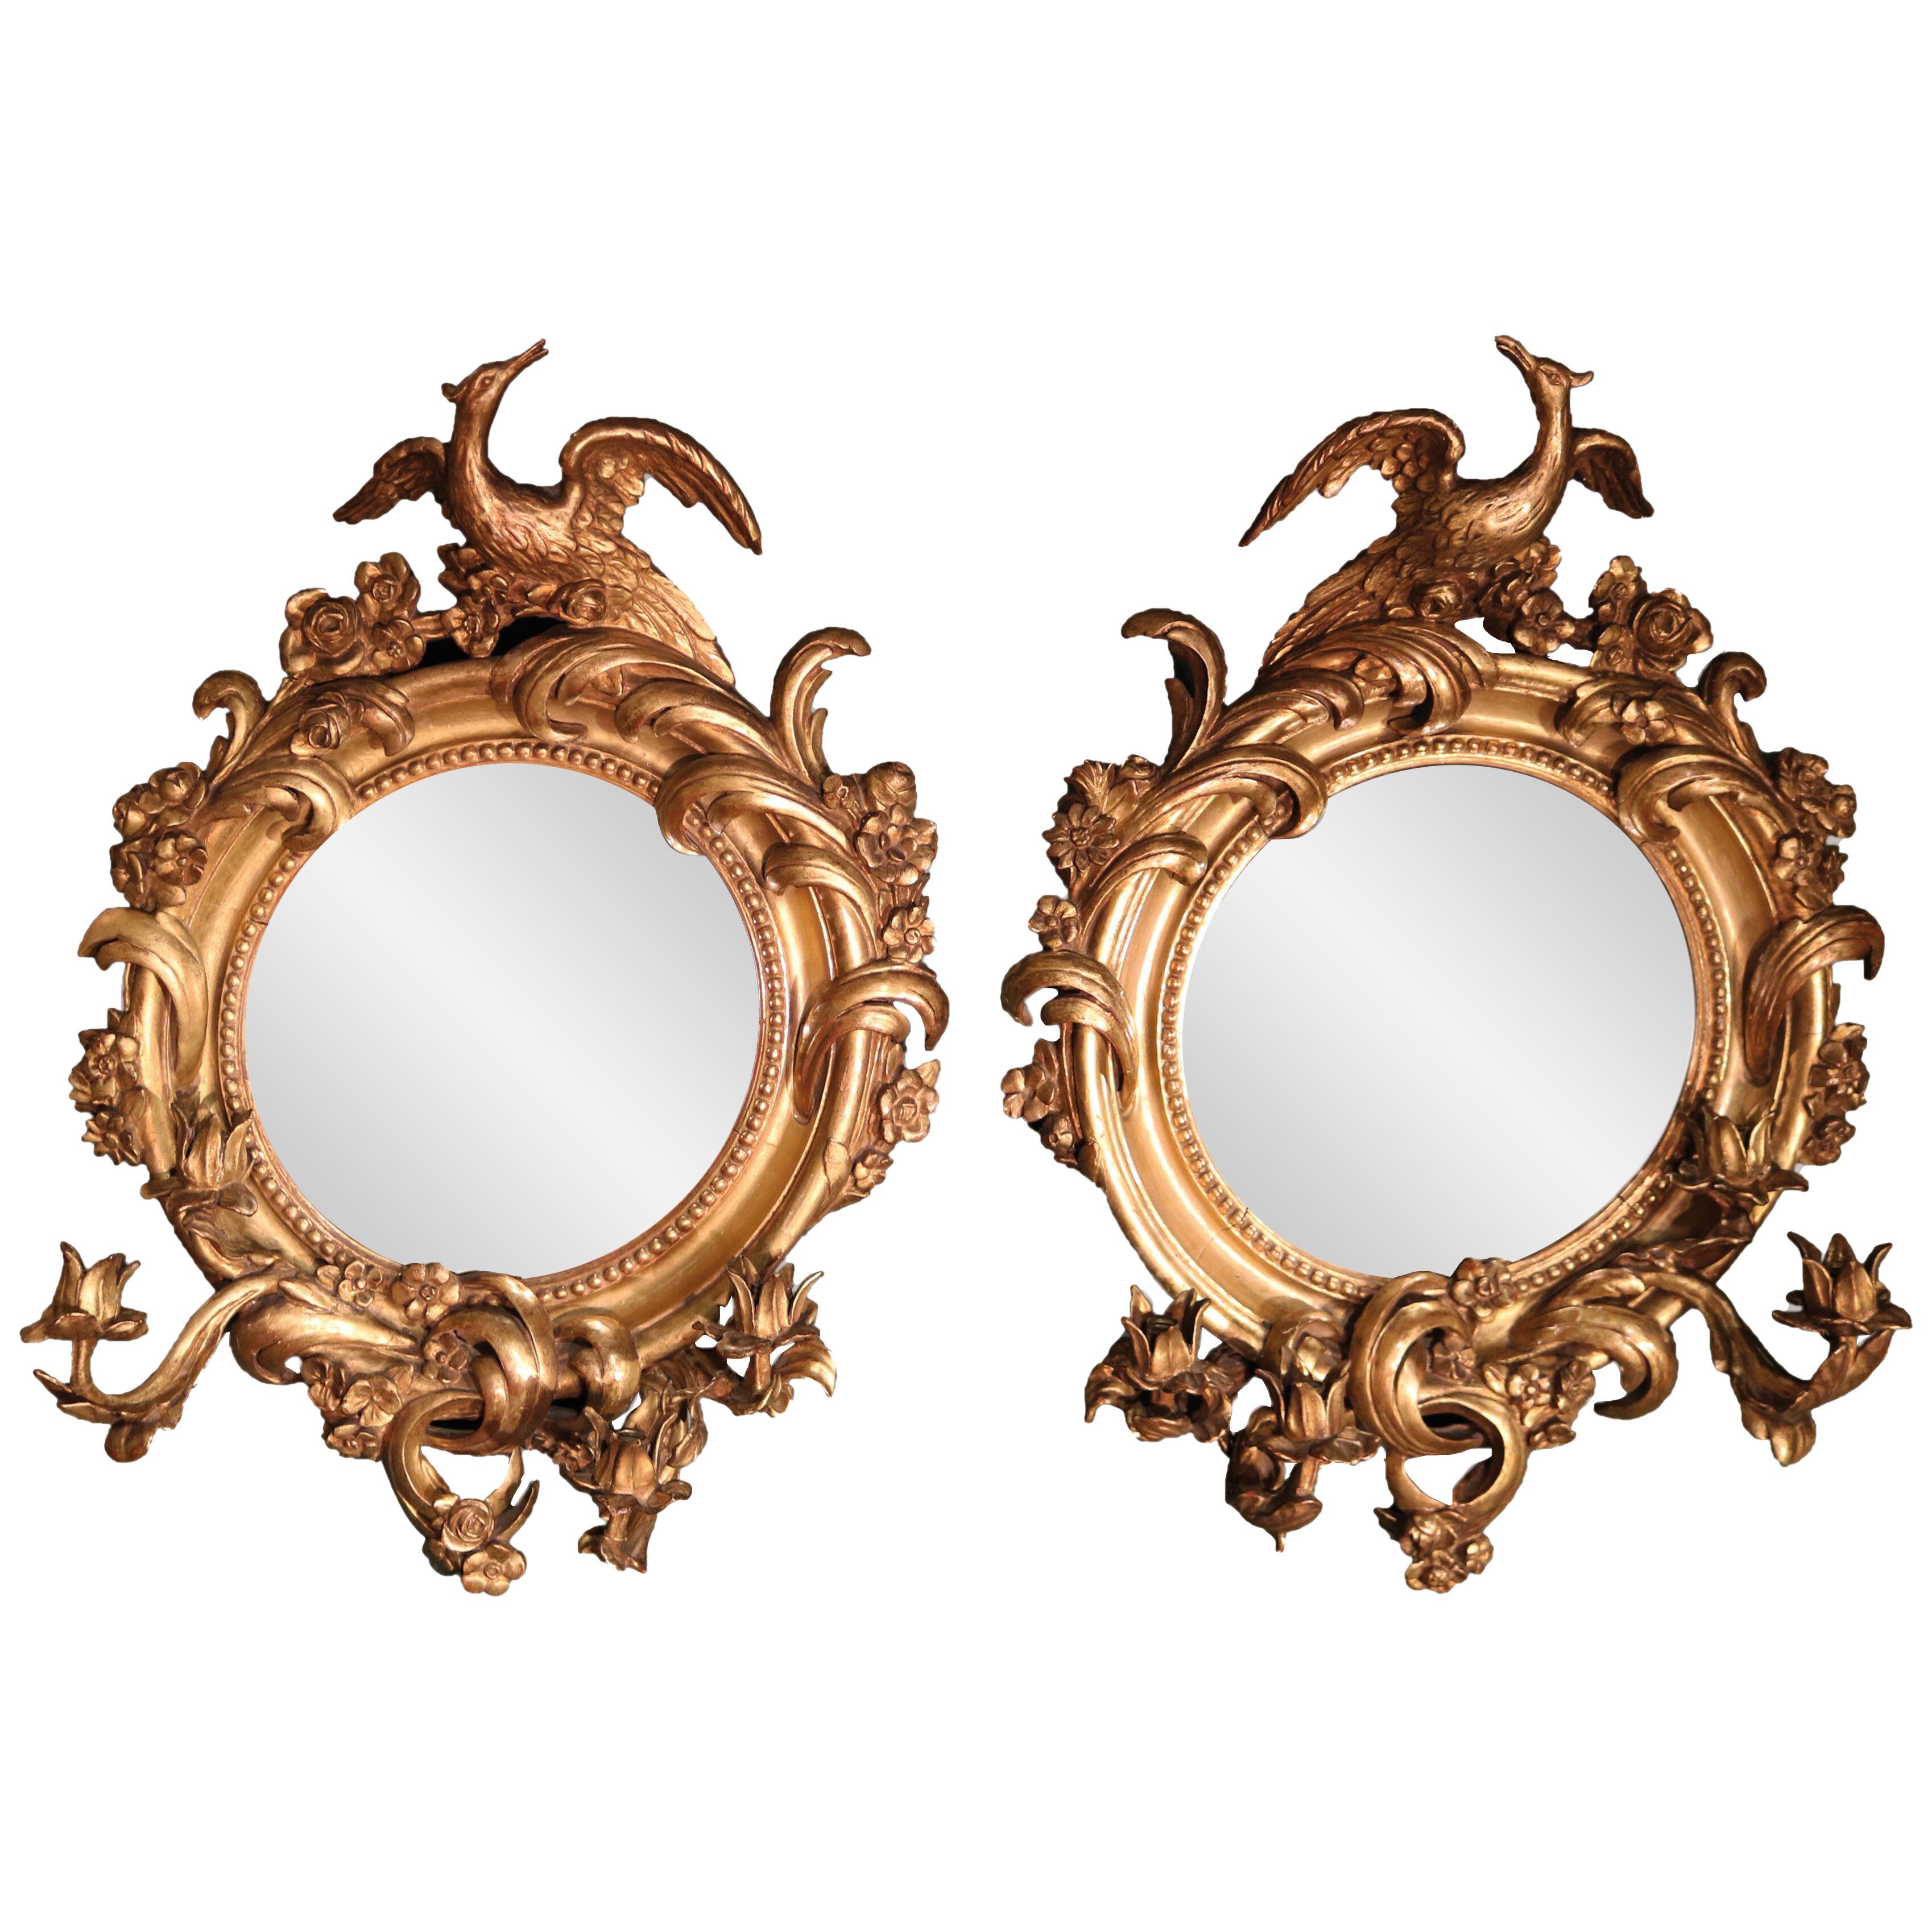 A pair of mid 19th century giltwood convex mirrors